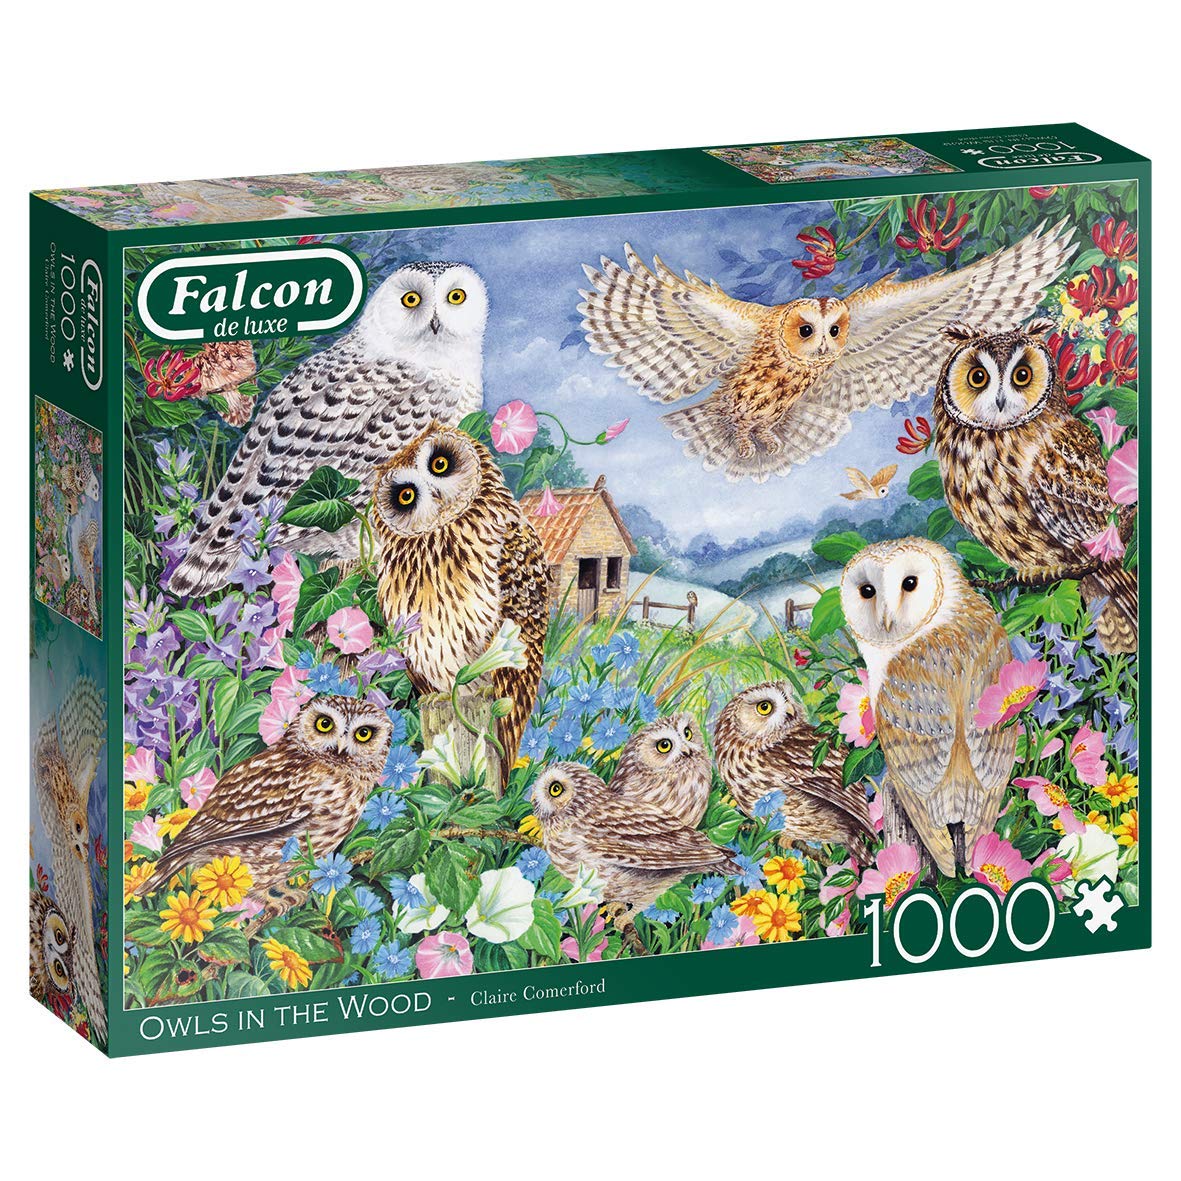 Falcon De Luxe - Owls In The Wood - 1000 Piece Jigsaw Puzzle